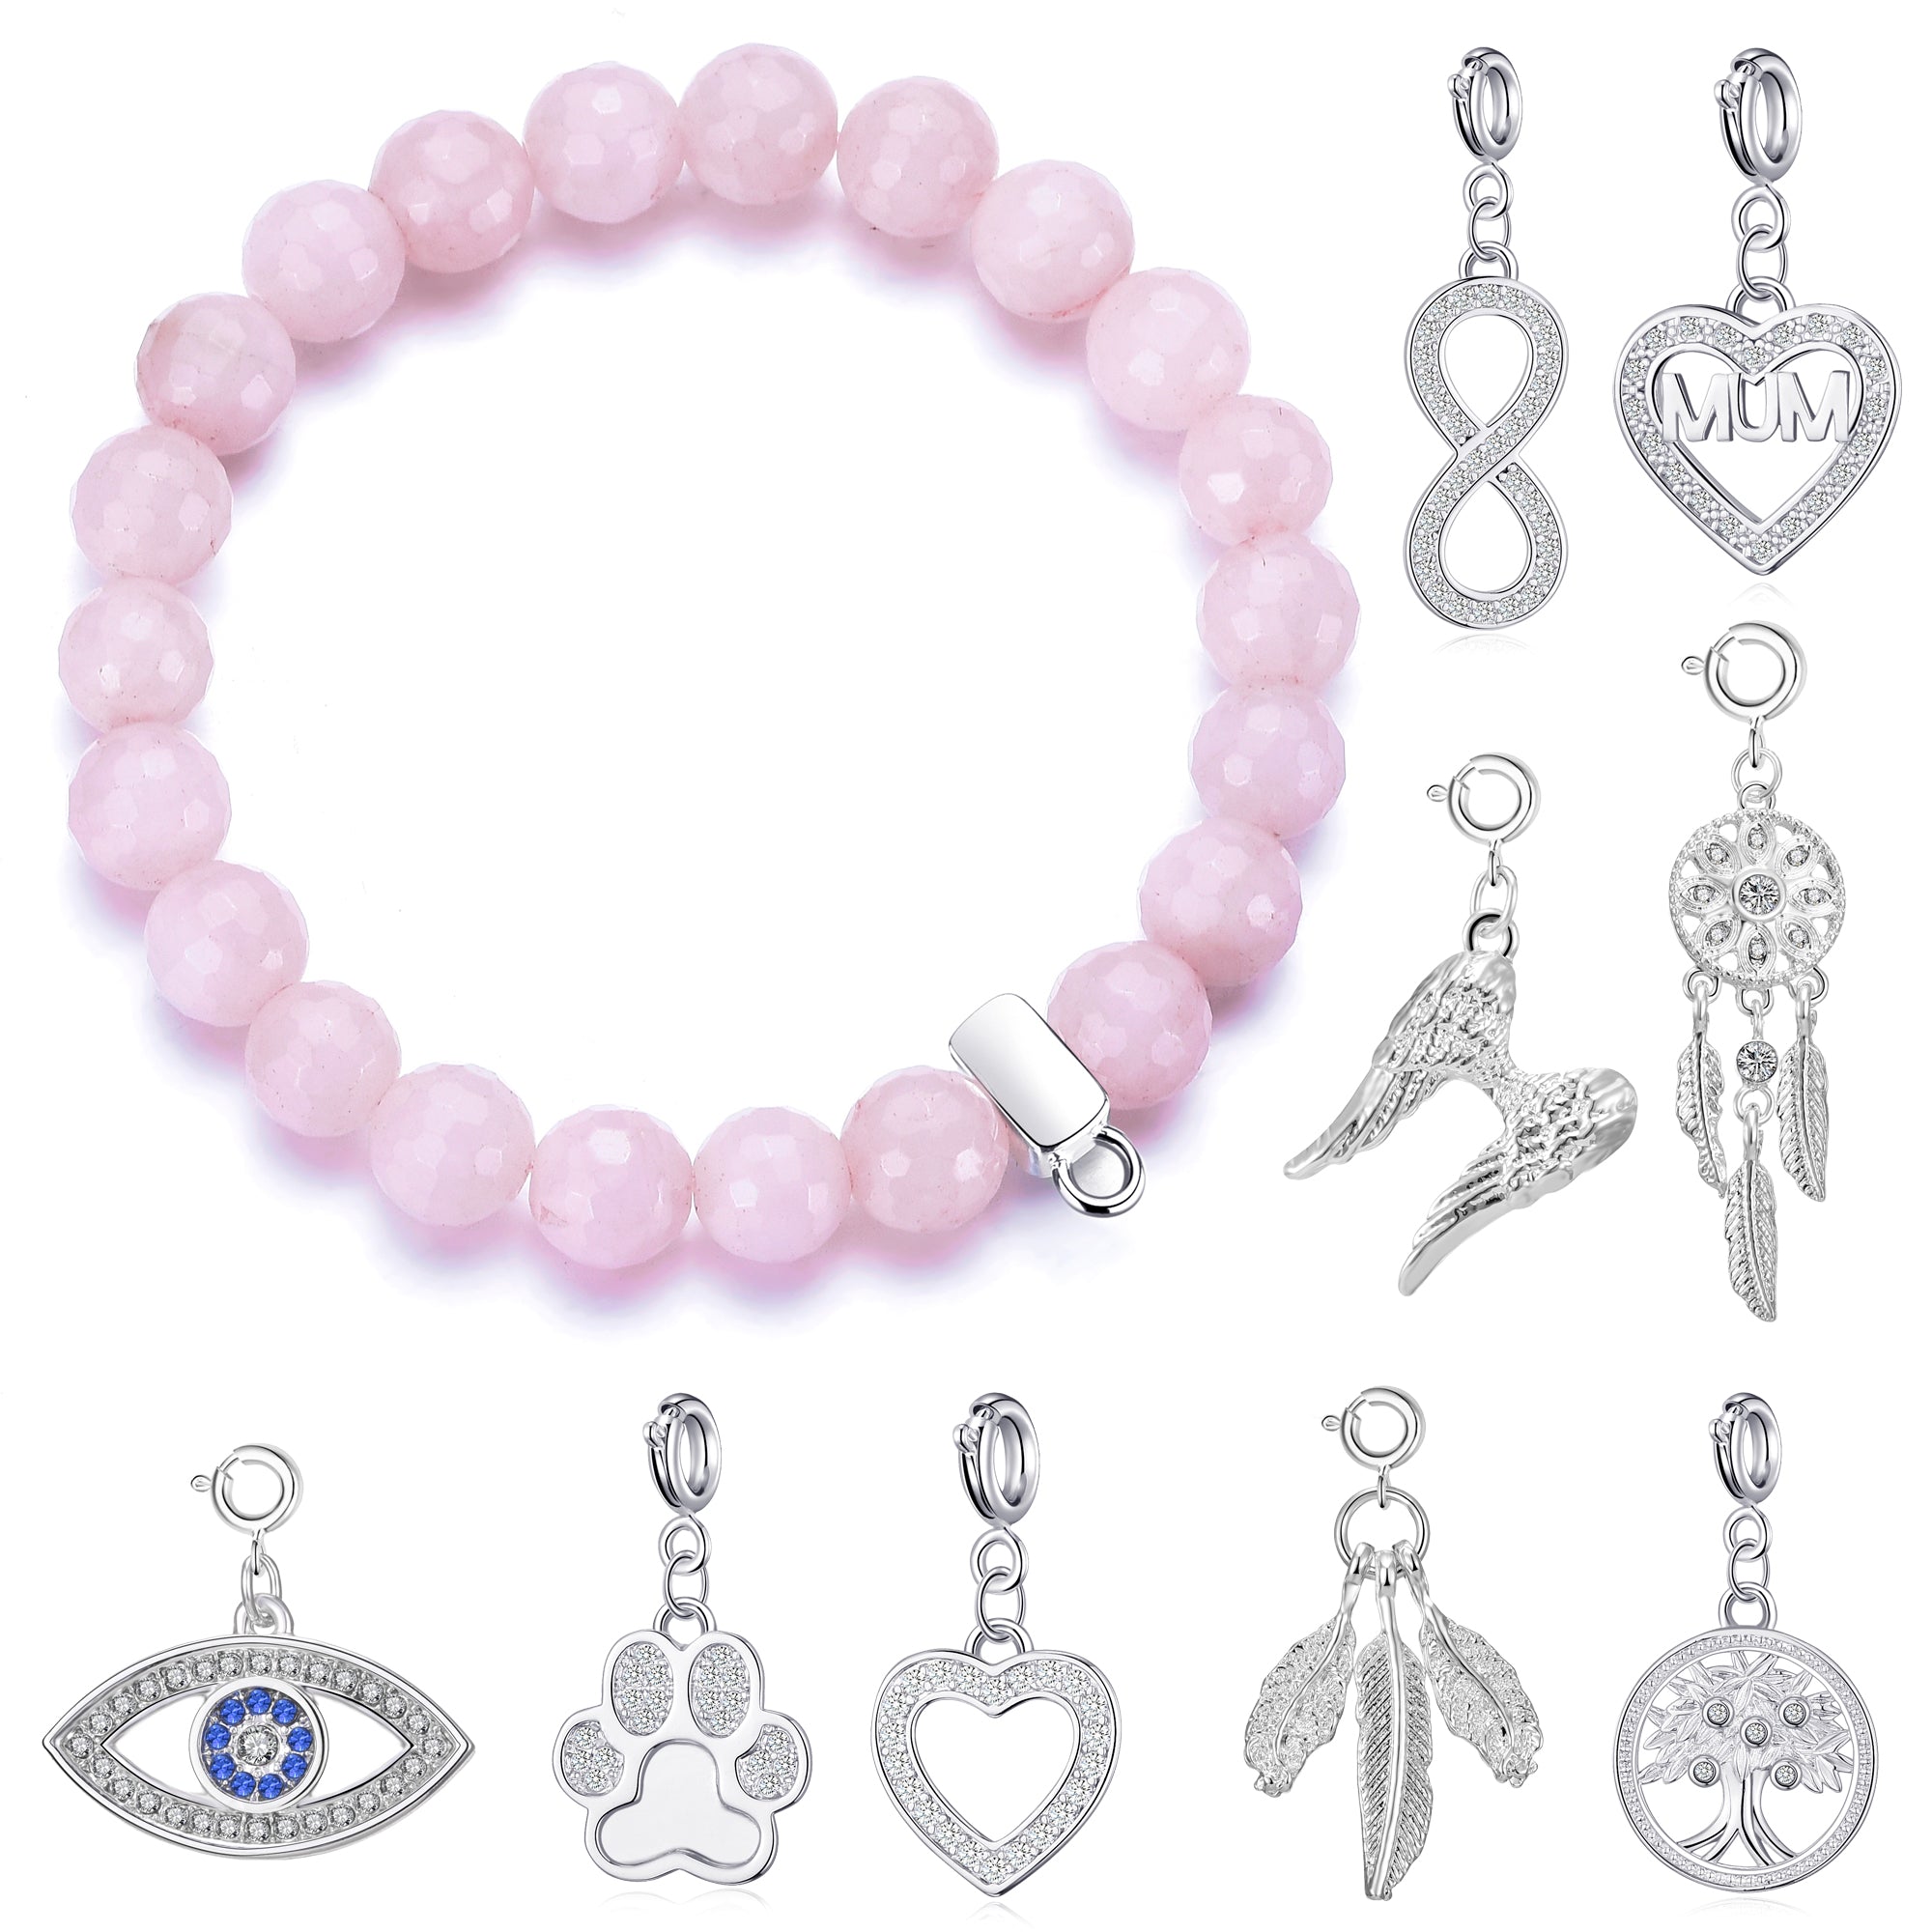 Faceted Rose Quartz Gemstone Stretch Bracelet with Charm Created with Zircondia® Crystals by Philip Jones Jewellery